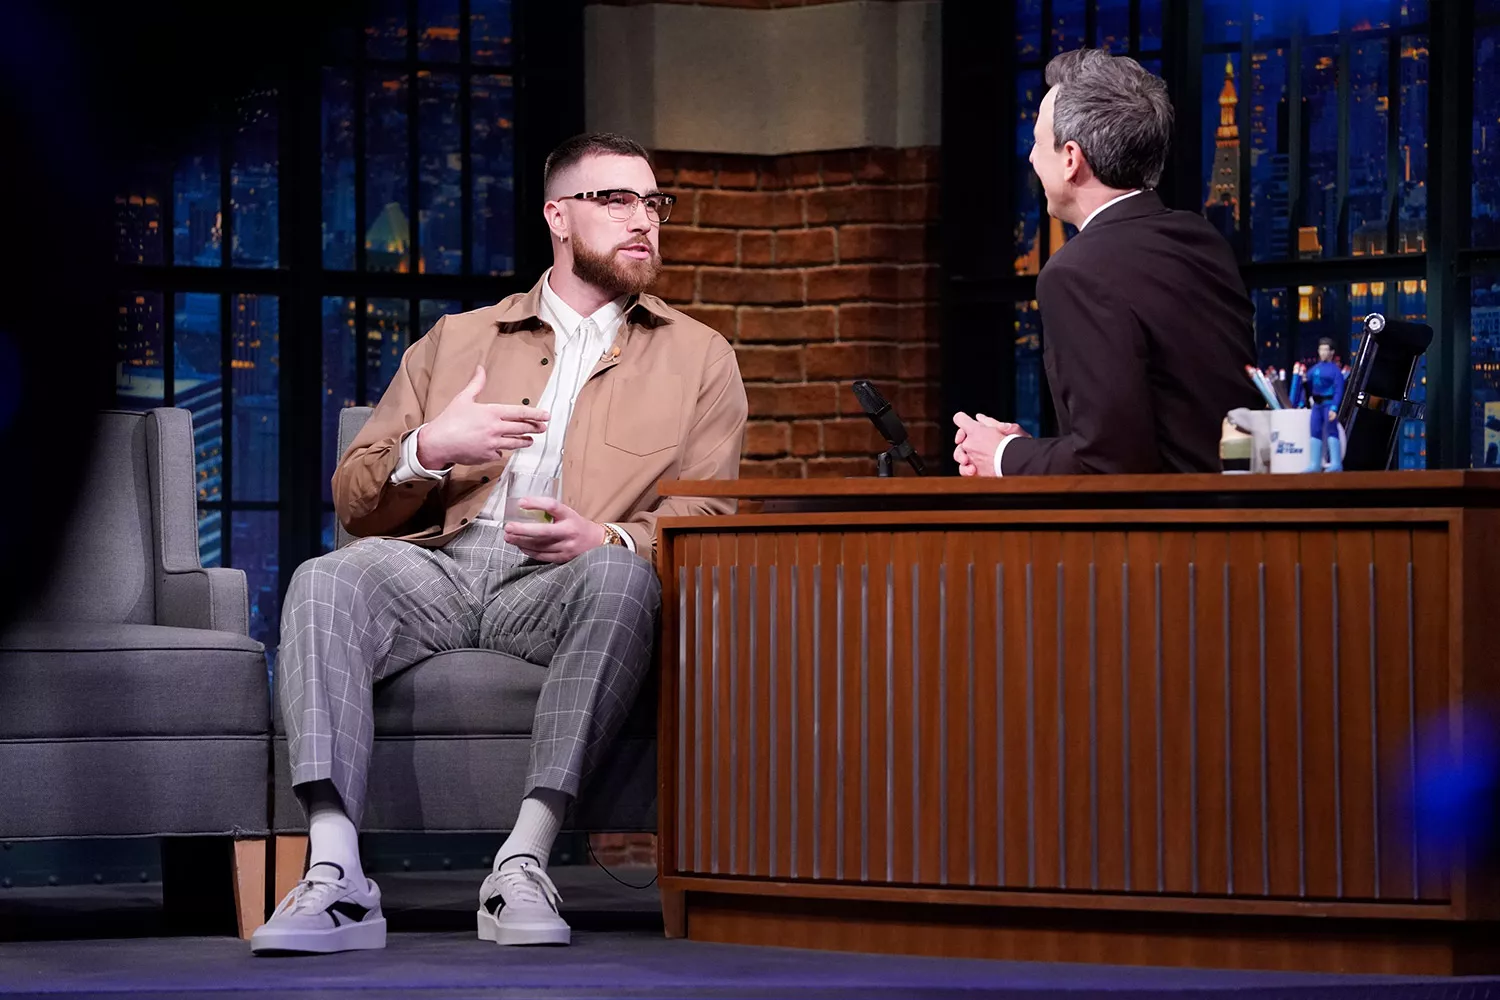 Kansas City Chiefs' Travis Kelce during an interview with host Seth Meyers on February 26, 2020